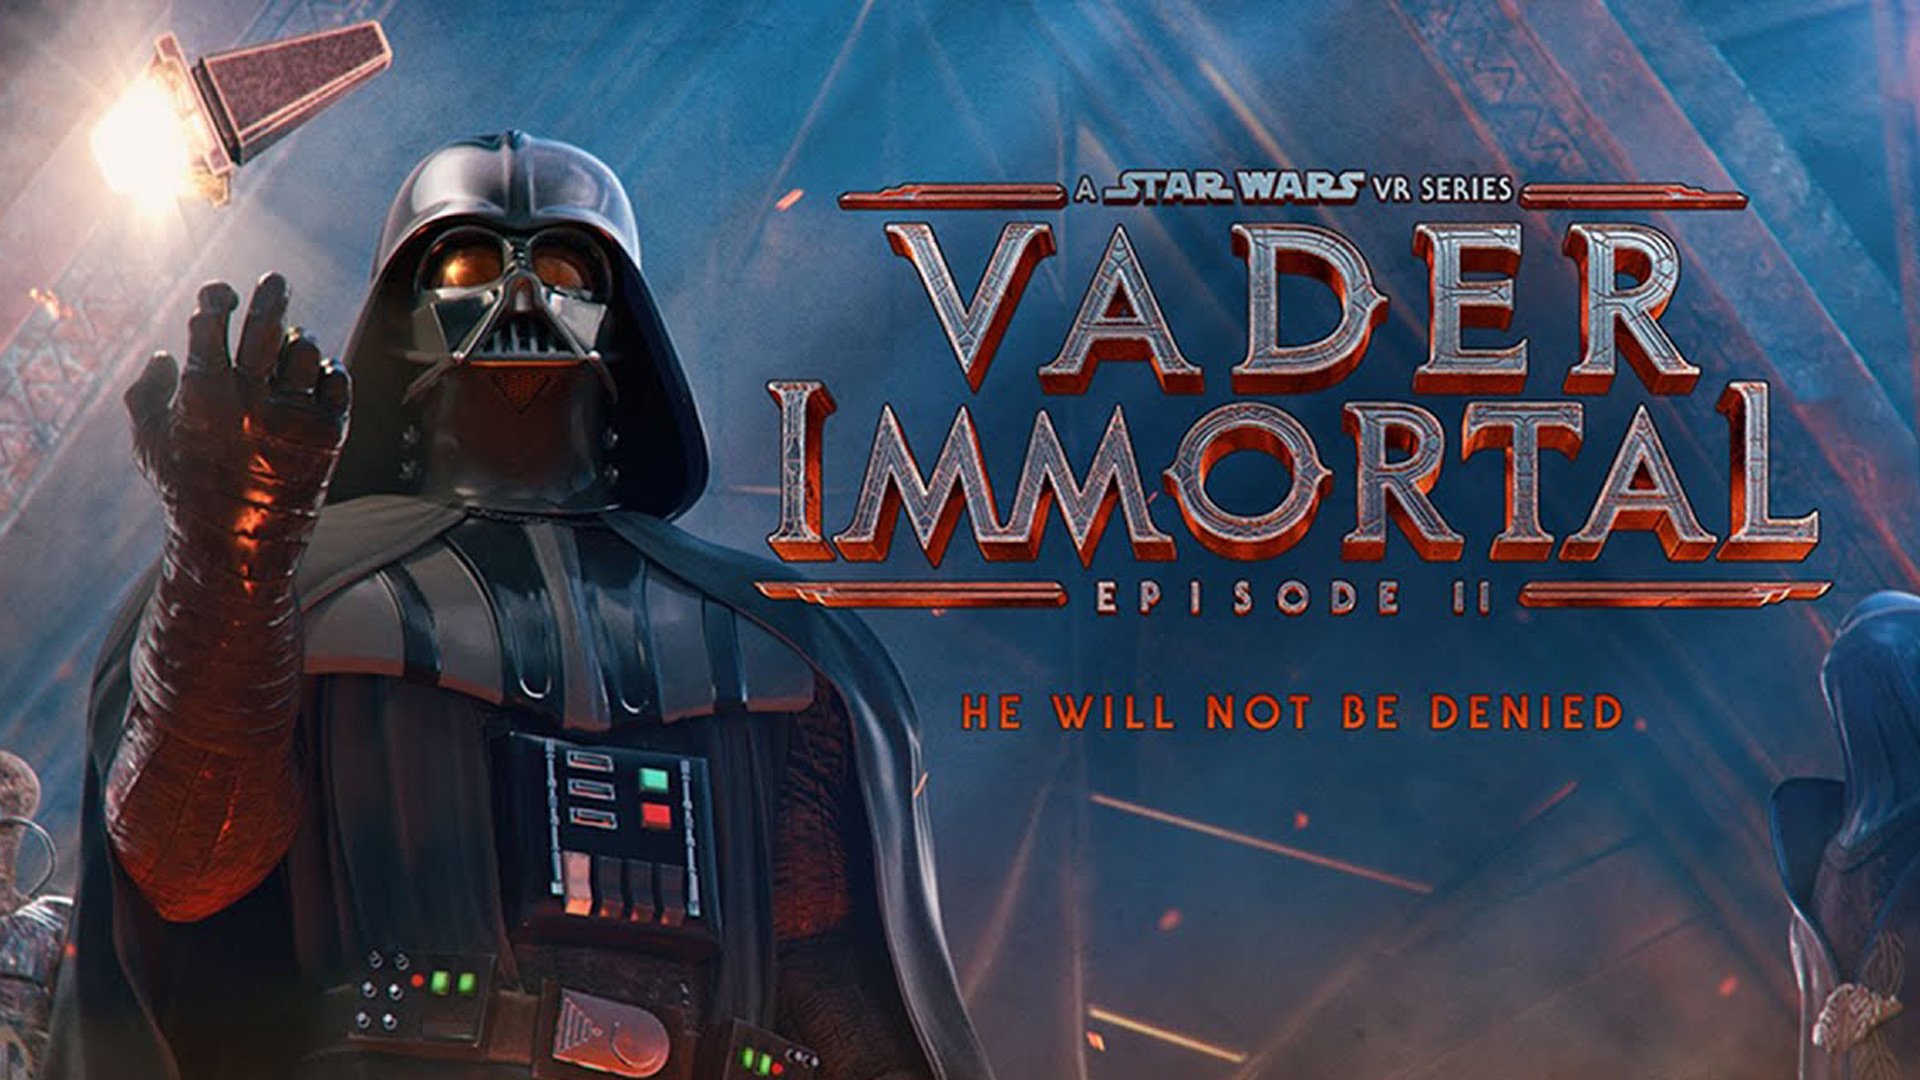 Fight the dark side of the Force with Vader Immortal: A Star Wars VR Stories